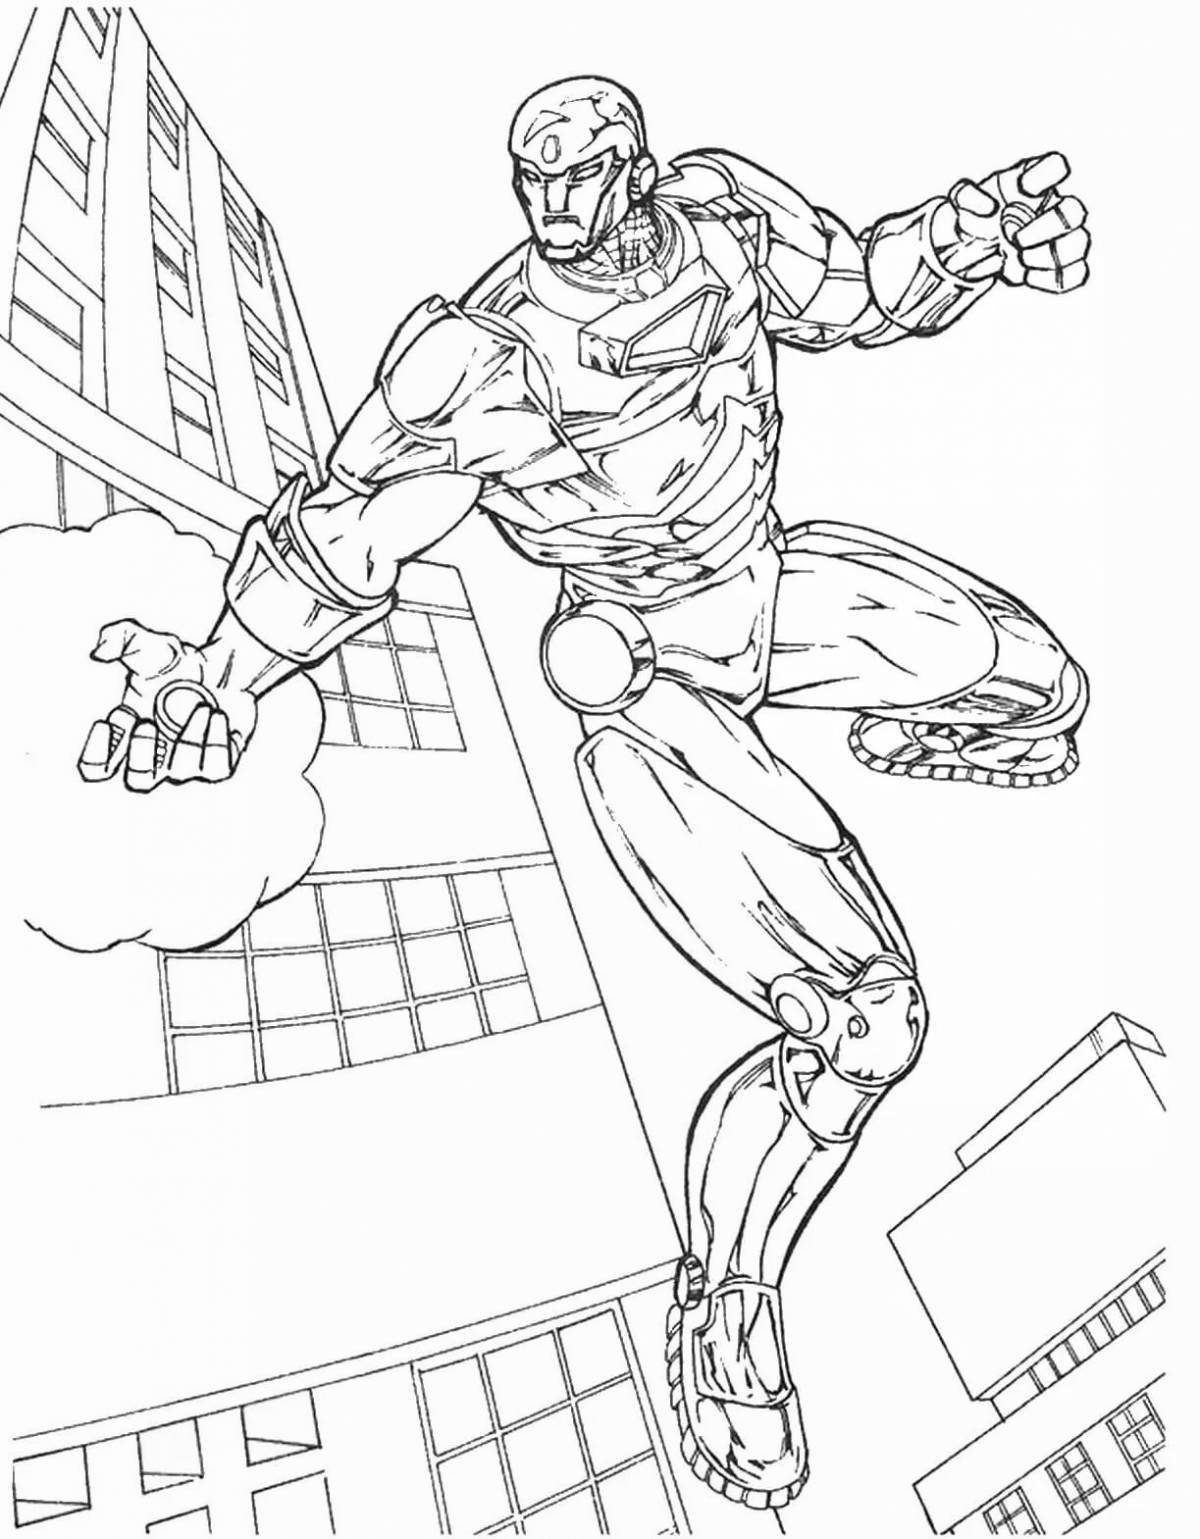 Marvel iron man coloring page